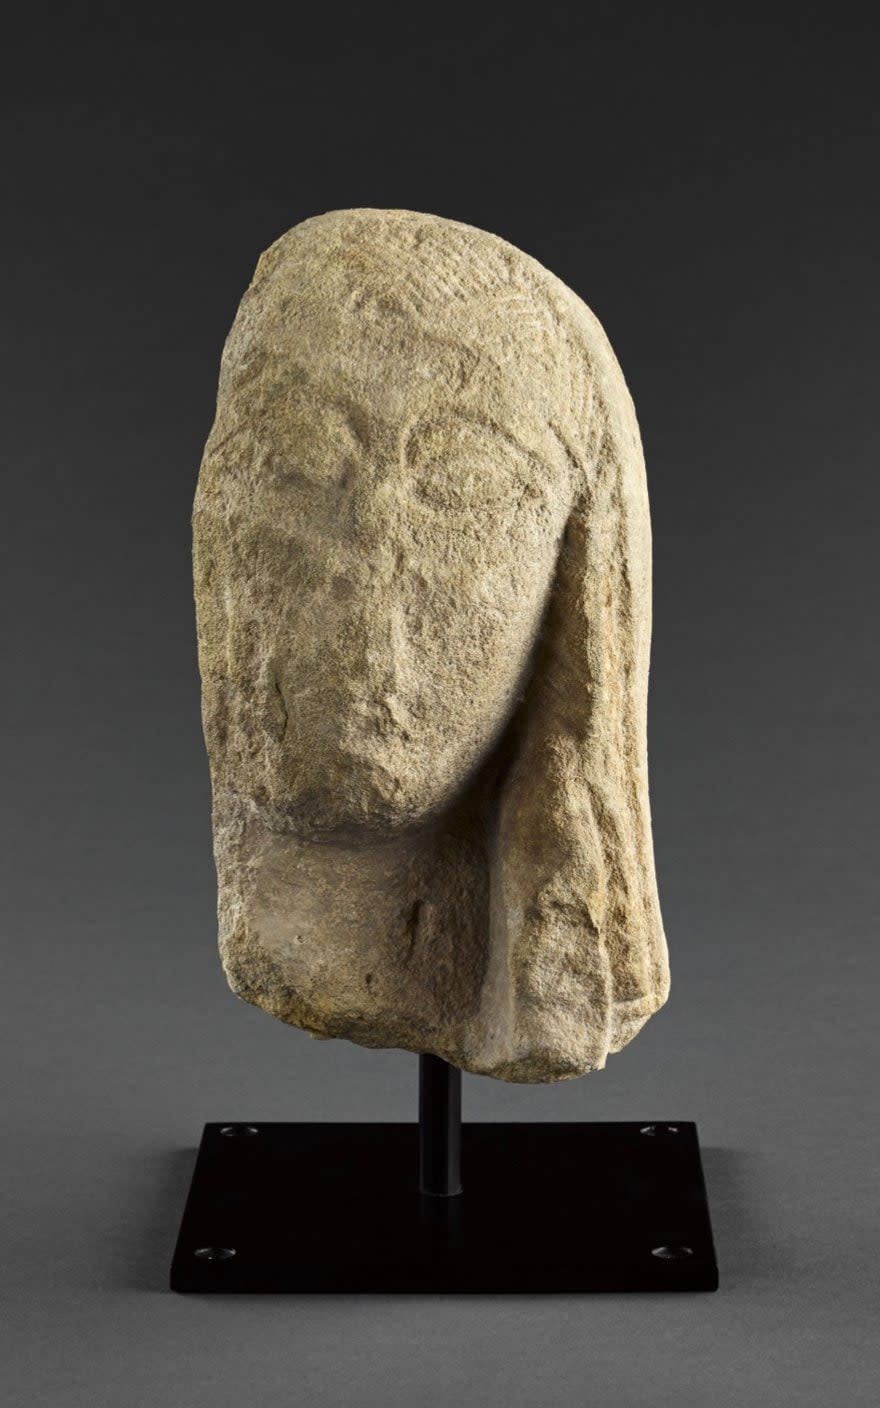 One of the Louvre’s stolen Iberian sculptures, dating from the 3rd century BC, which Picasso hid in a cupboard